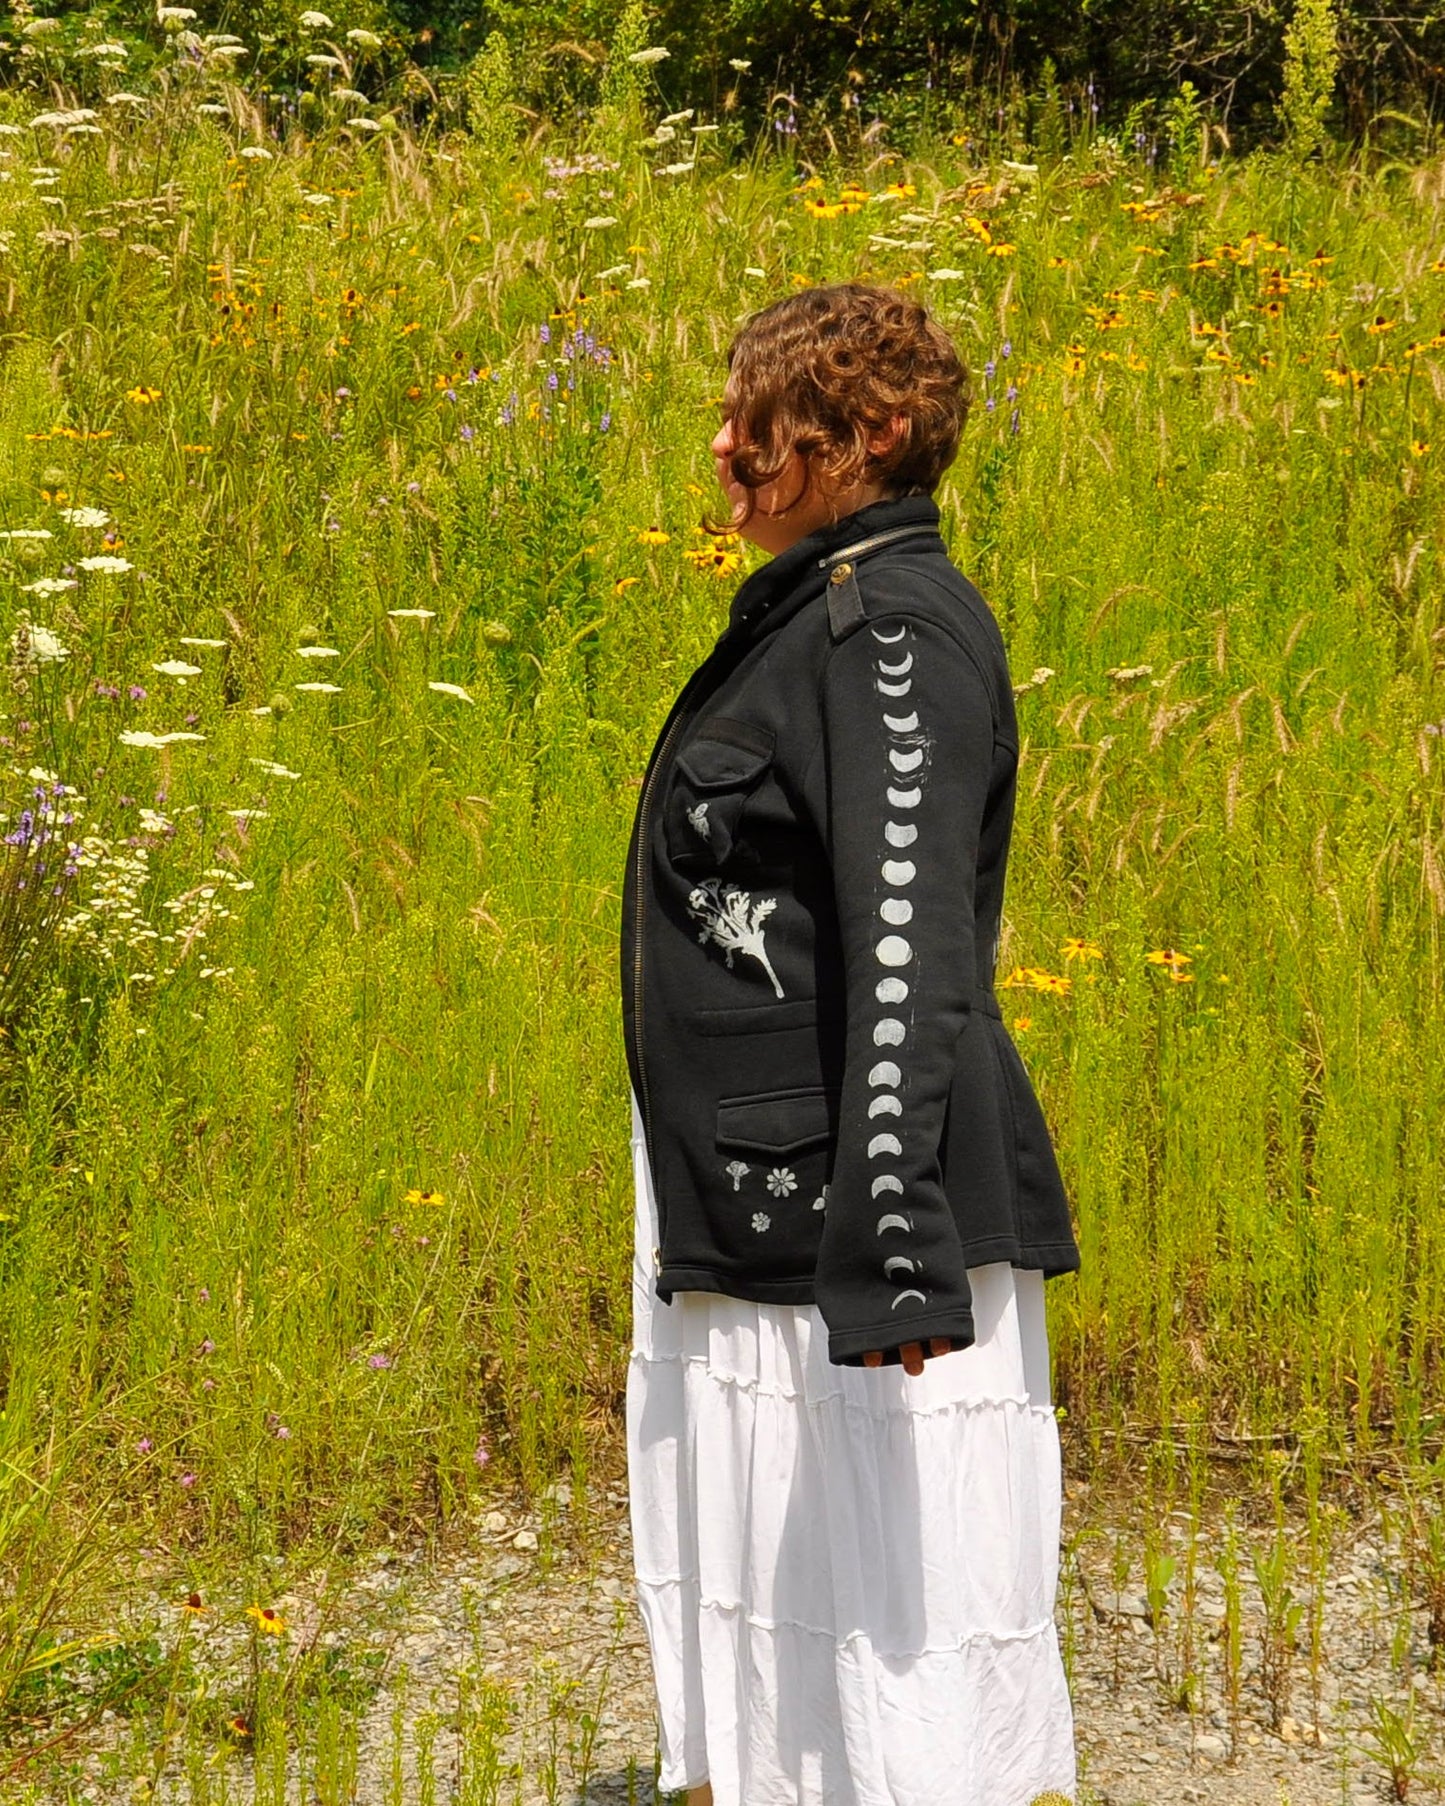 The Knight, Black Cotton Military-Style Jacket